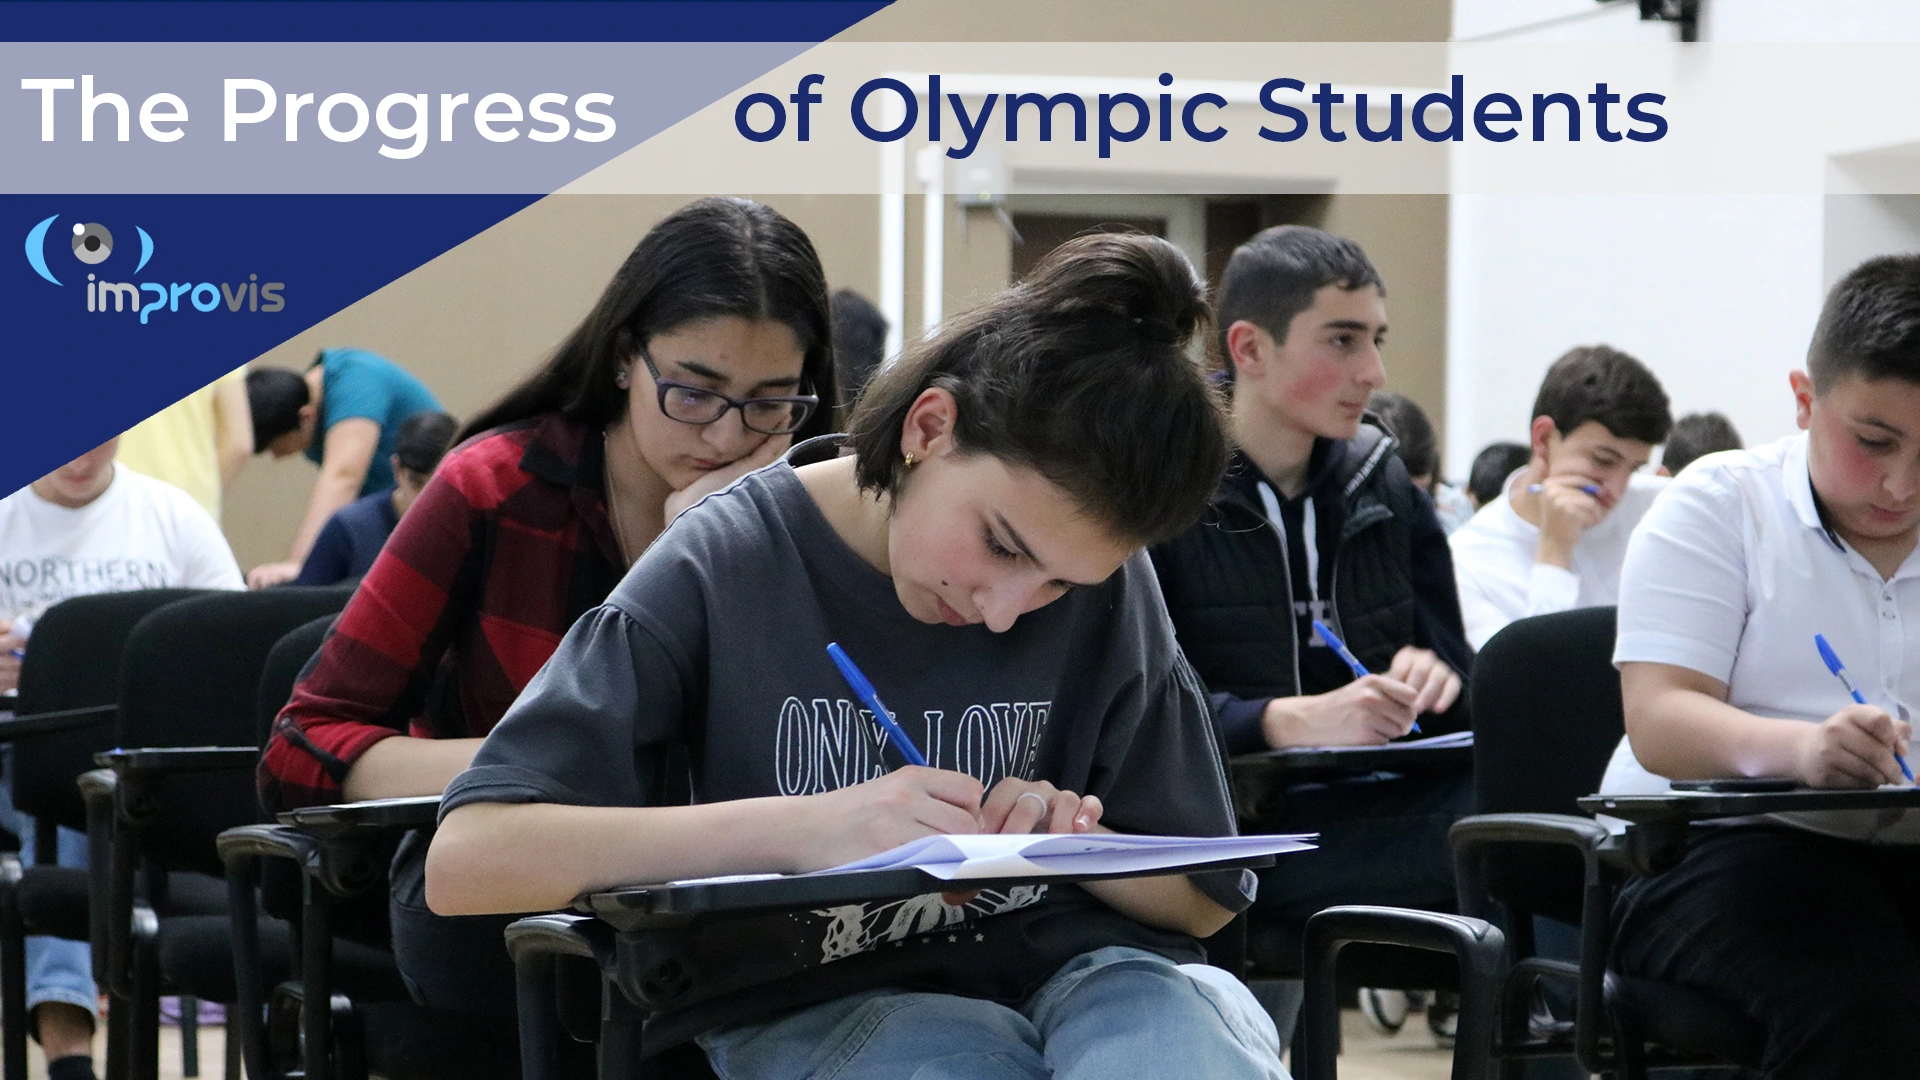 The progress of Olympic students